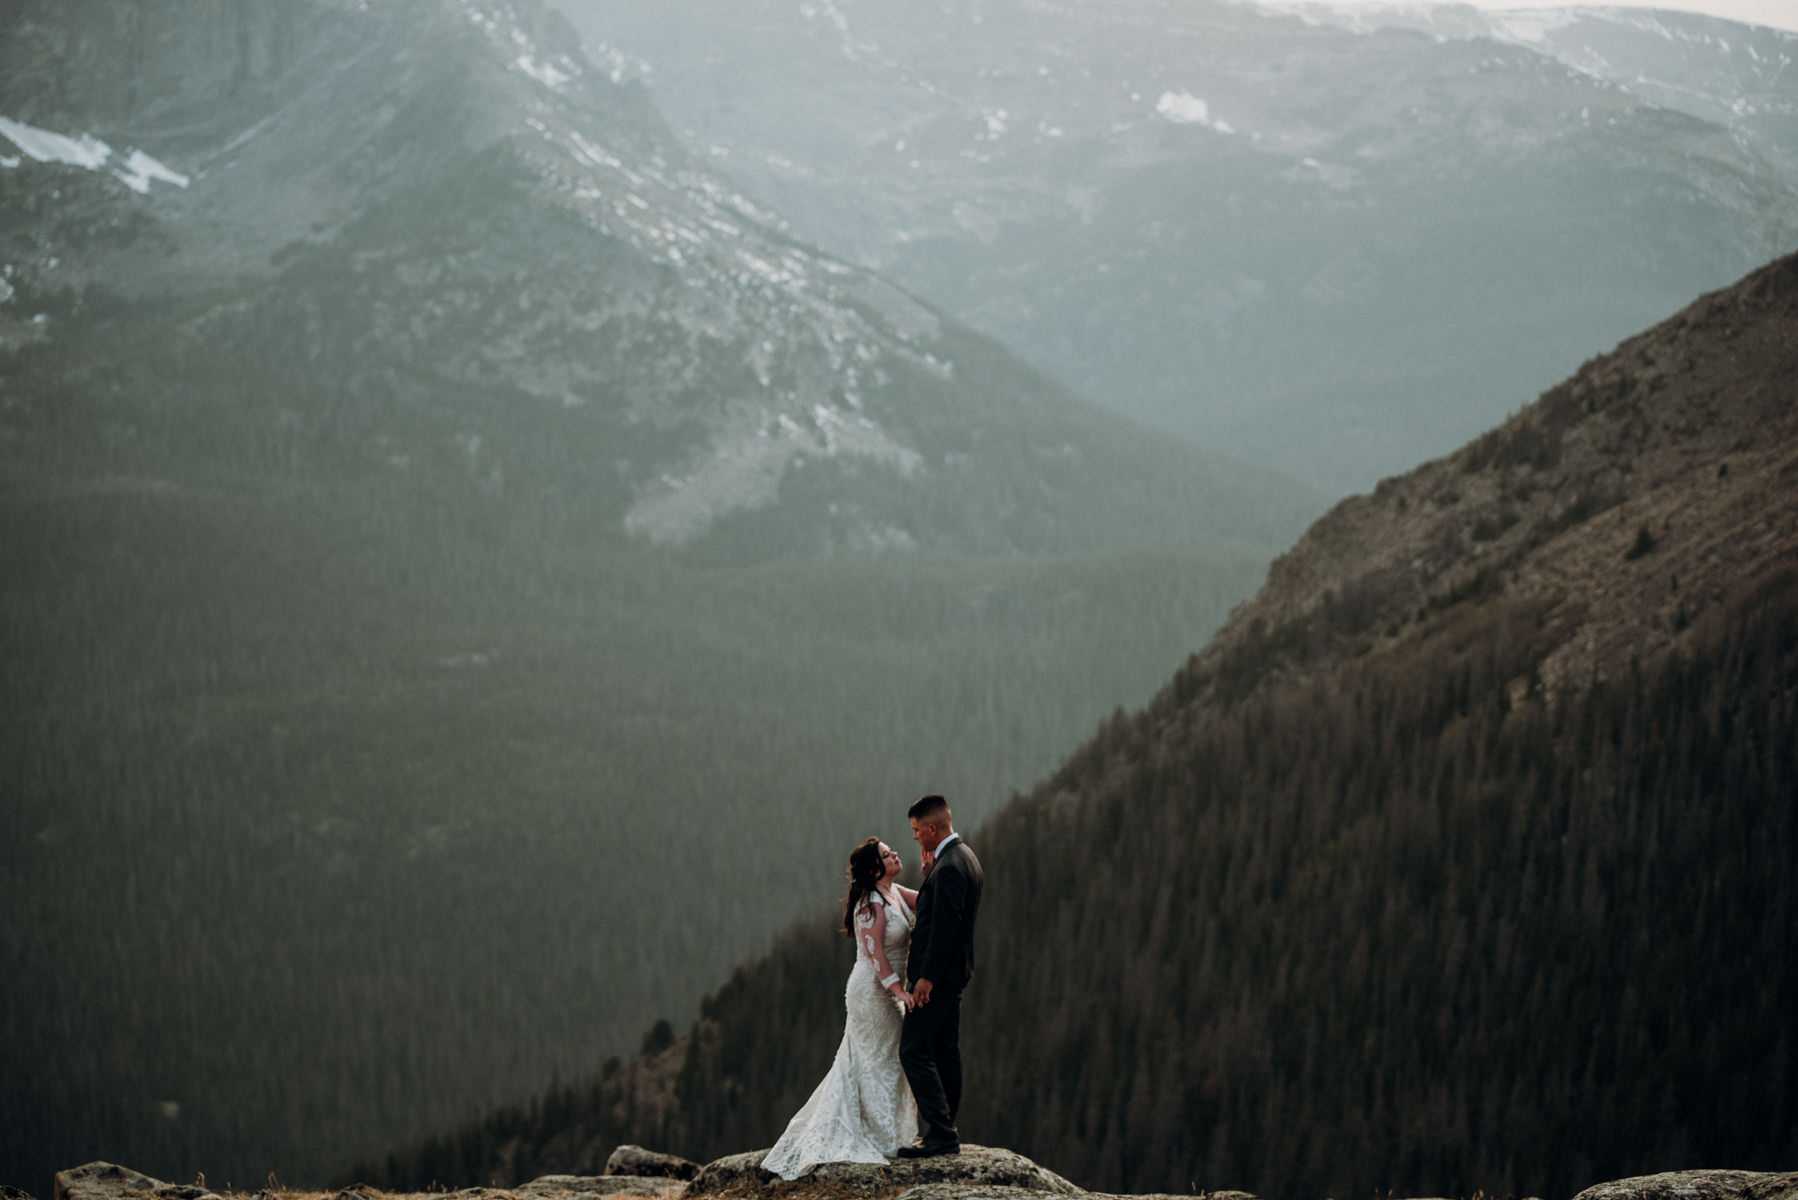 How to get married in Rocky Mountain National Park